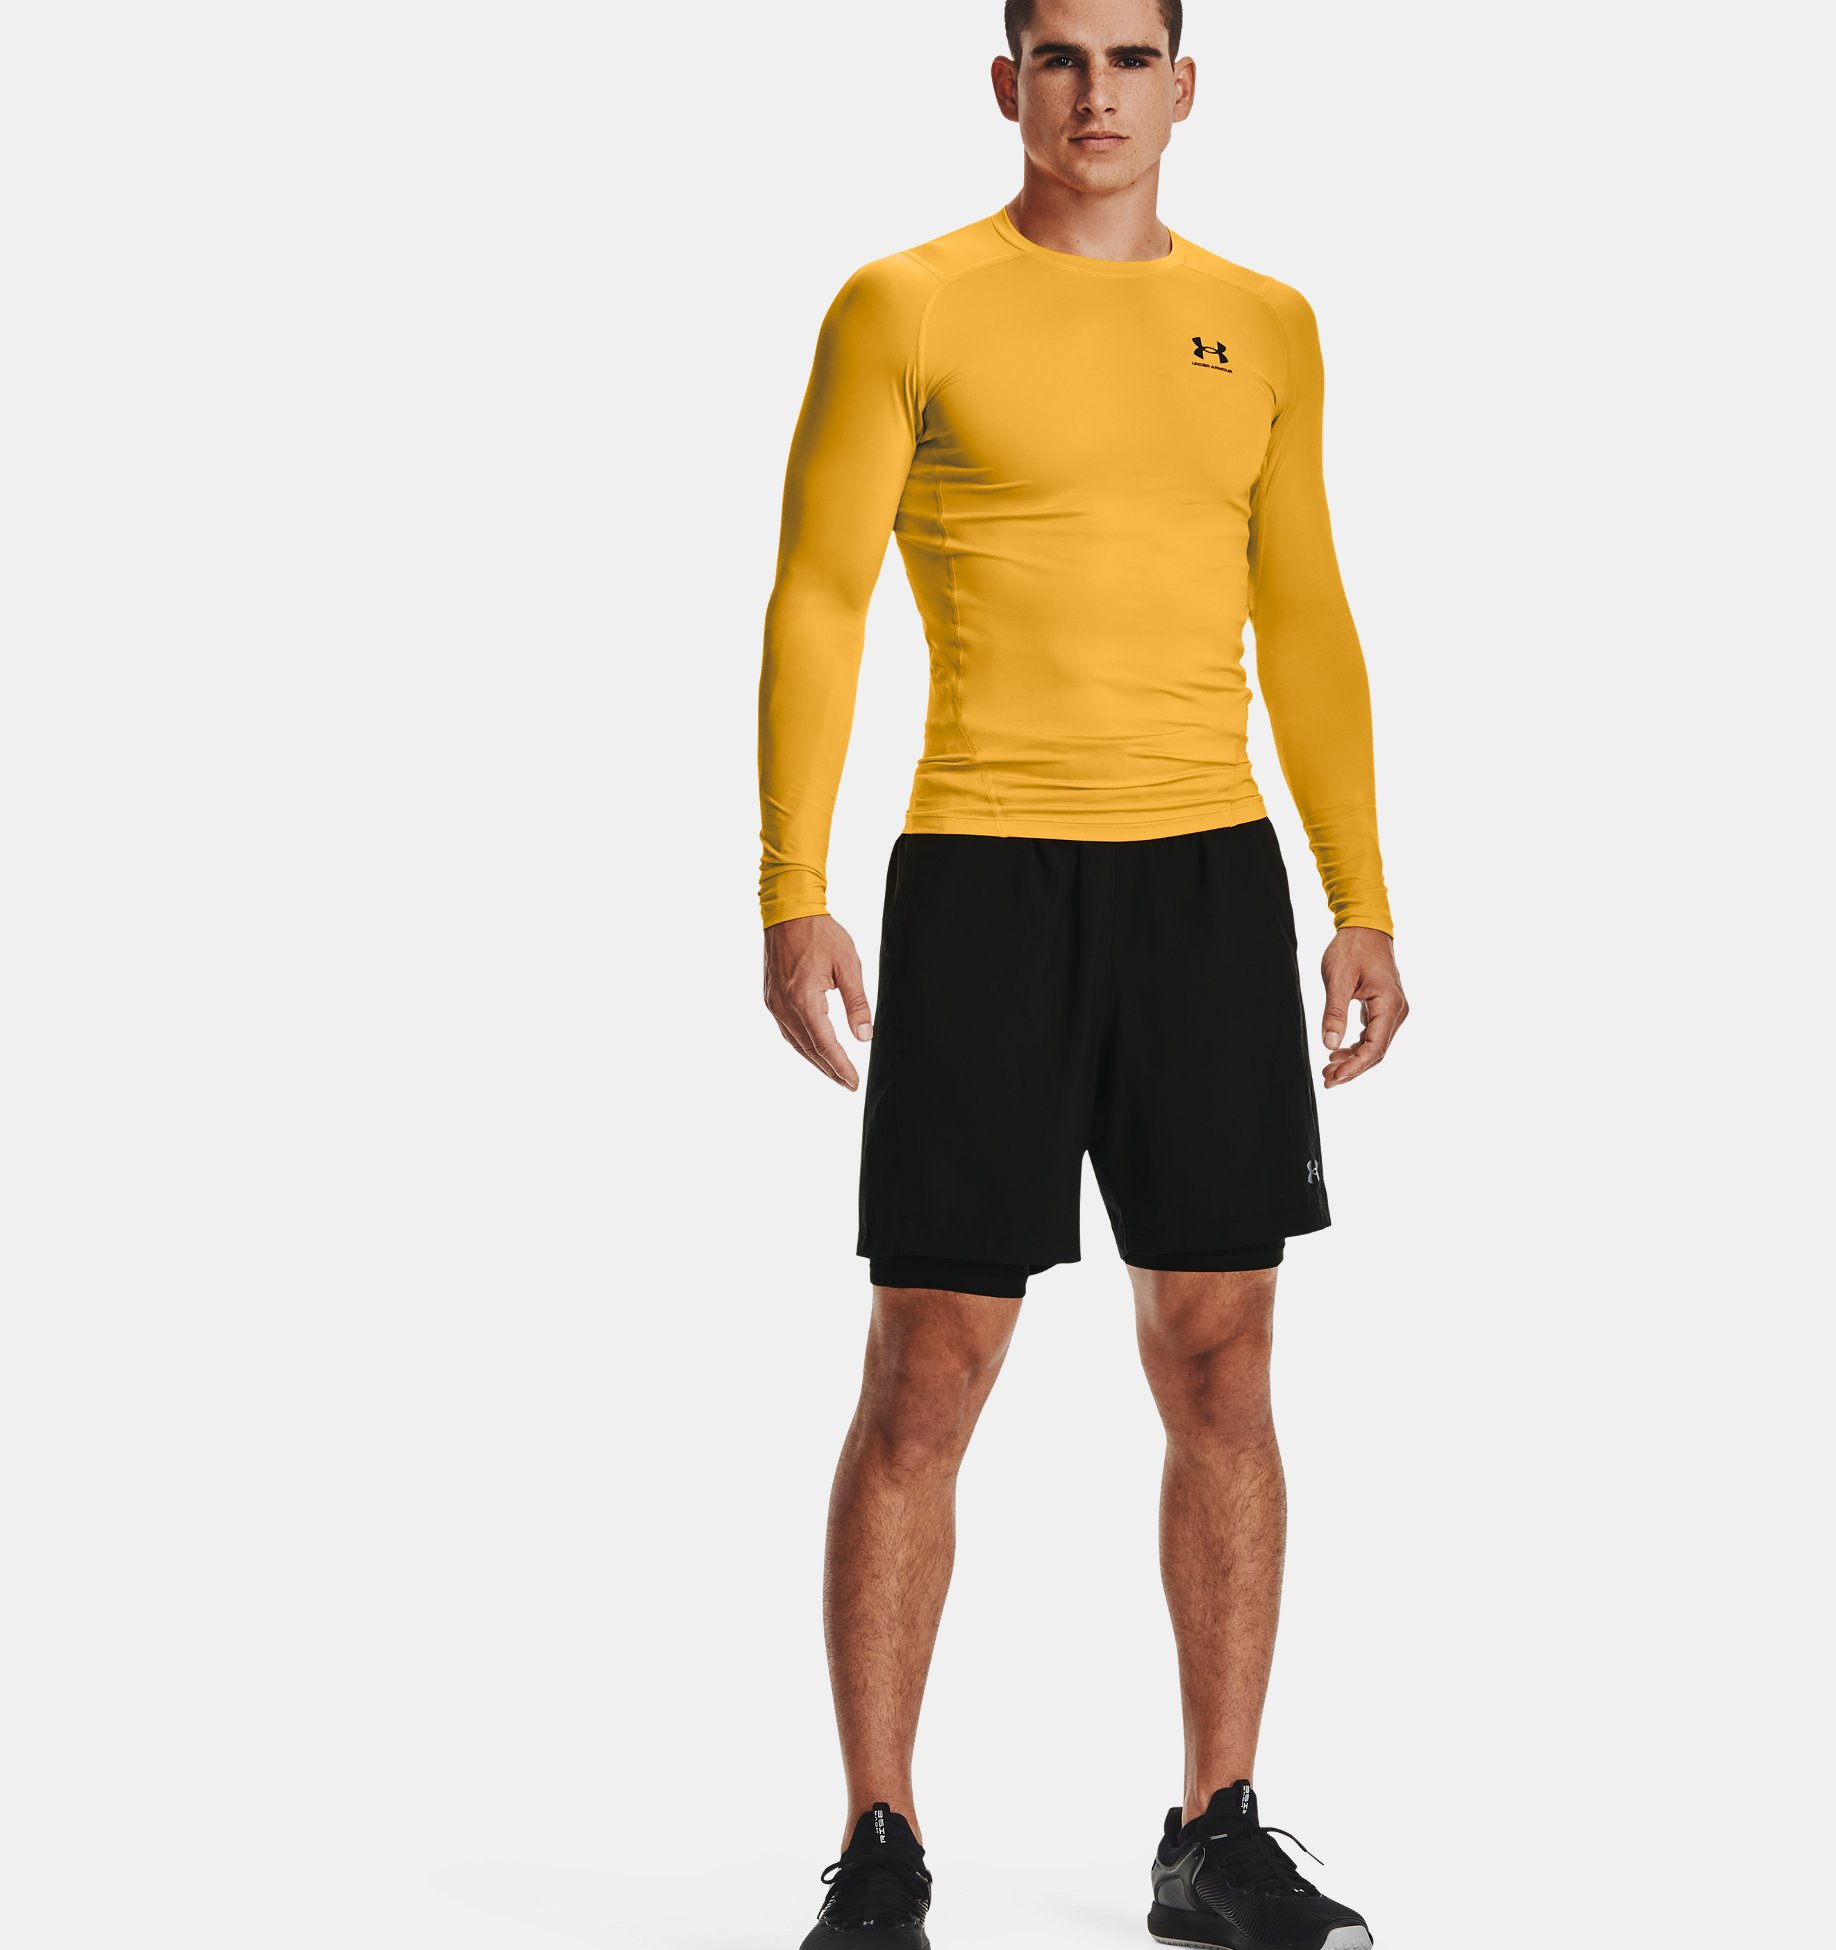 https://underarmour.scene7.com/is/image/Underarmour/V5-1361596-001_FSF?rp=standard-0pad|pdpZoomDesktop&scl=0.72&fmt=jpg&qlt=85&resMode=sharp2&cache=on,on&bgc=f0f0f0&wid=1836&hei=1950&size=1500,1500